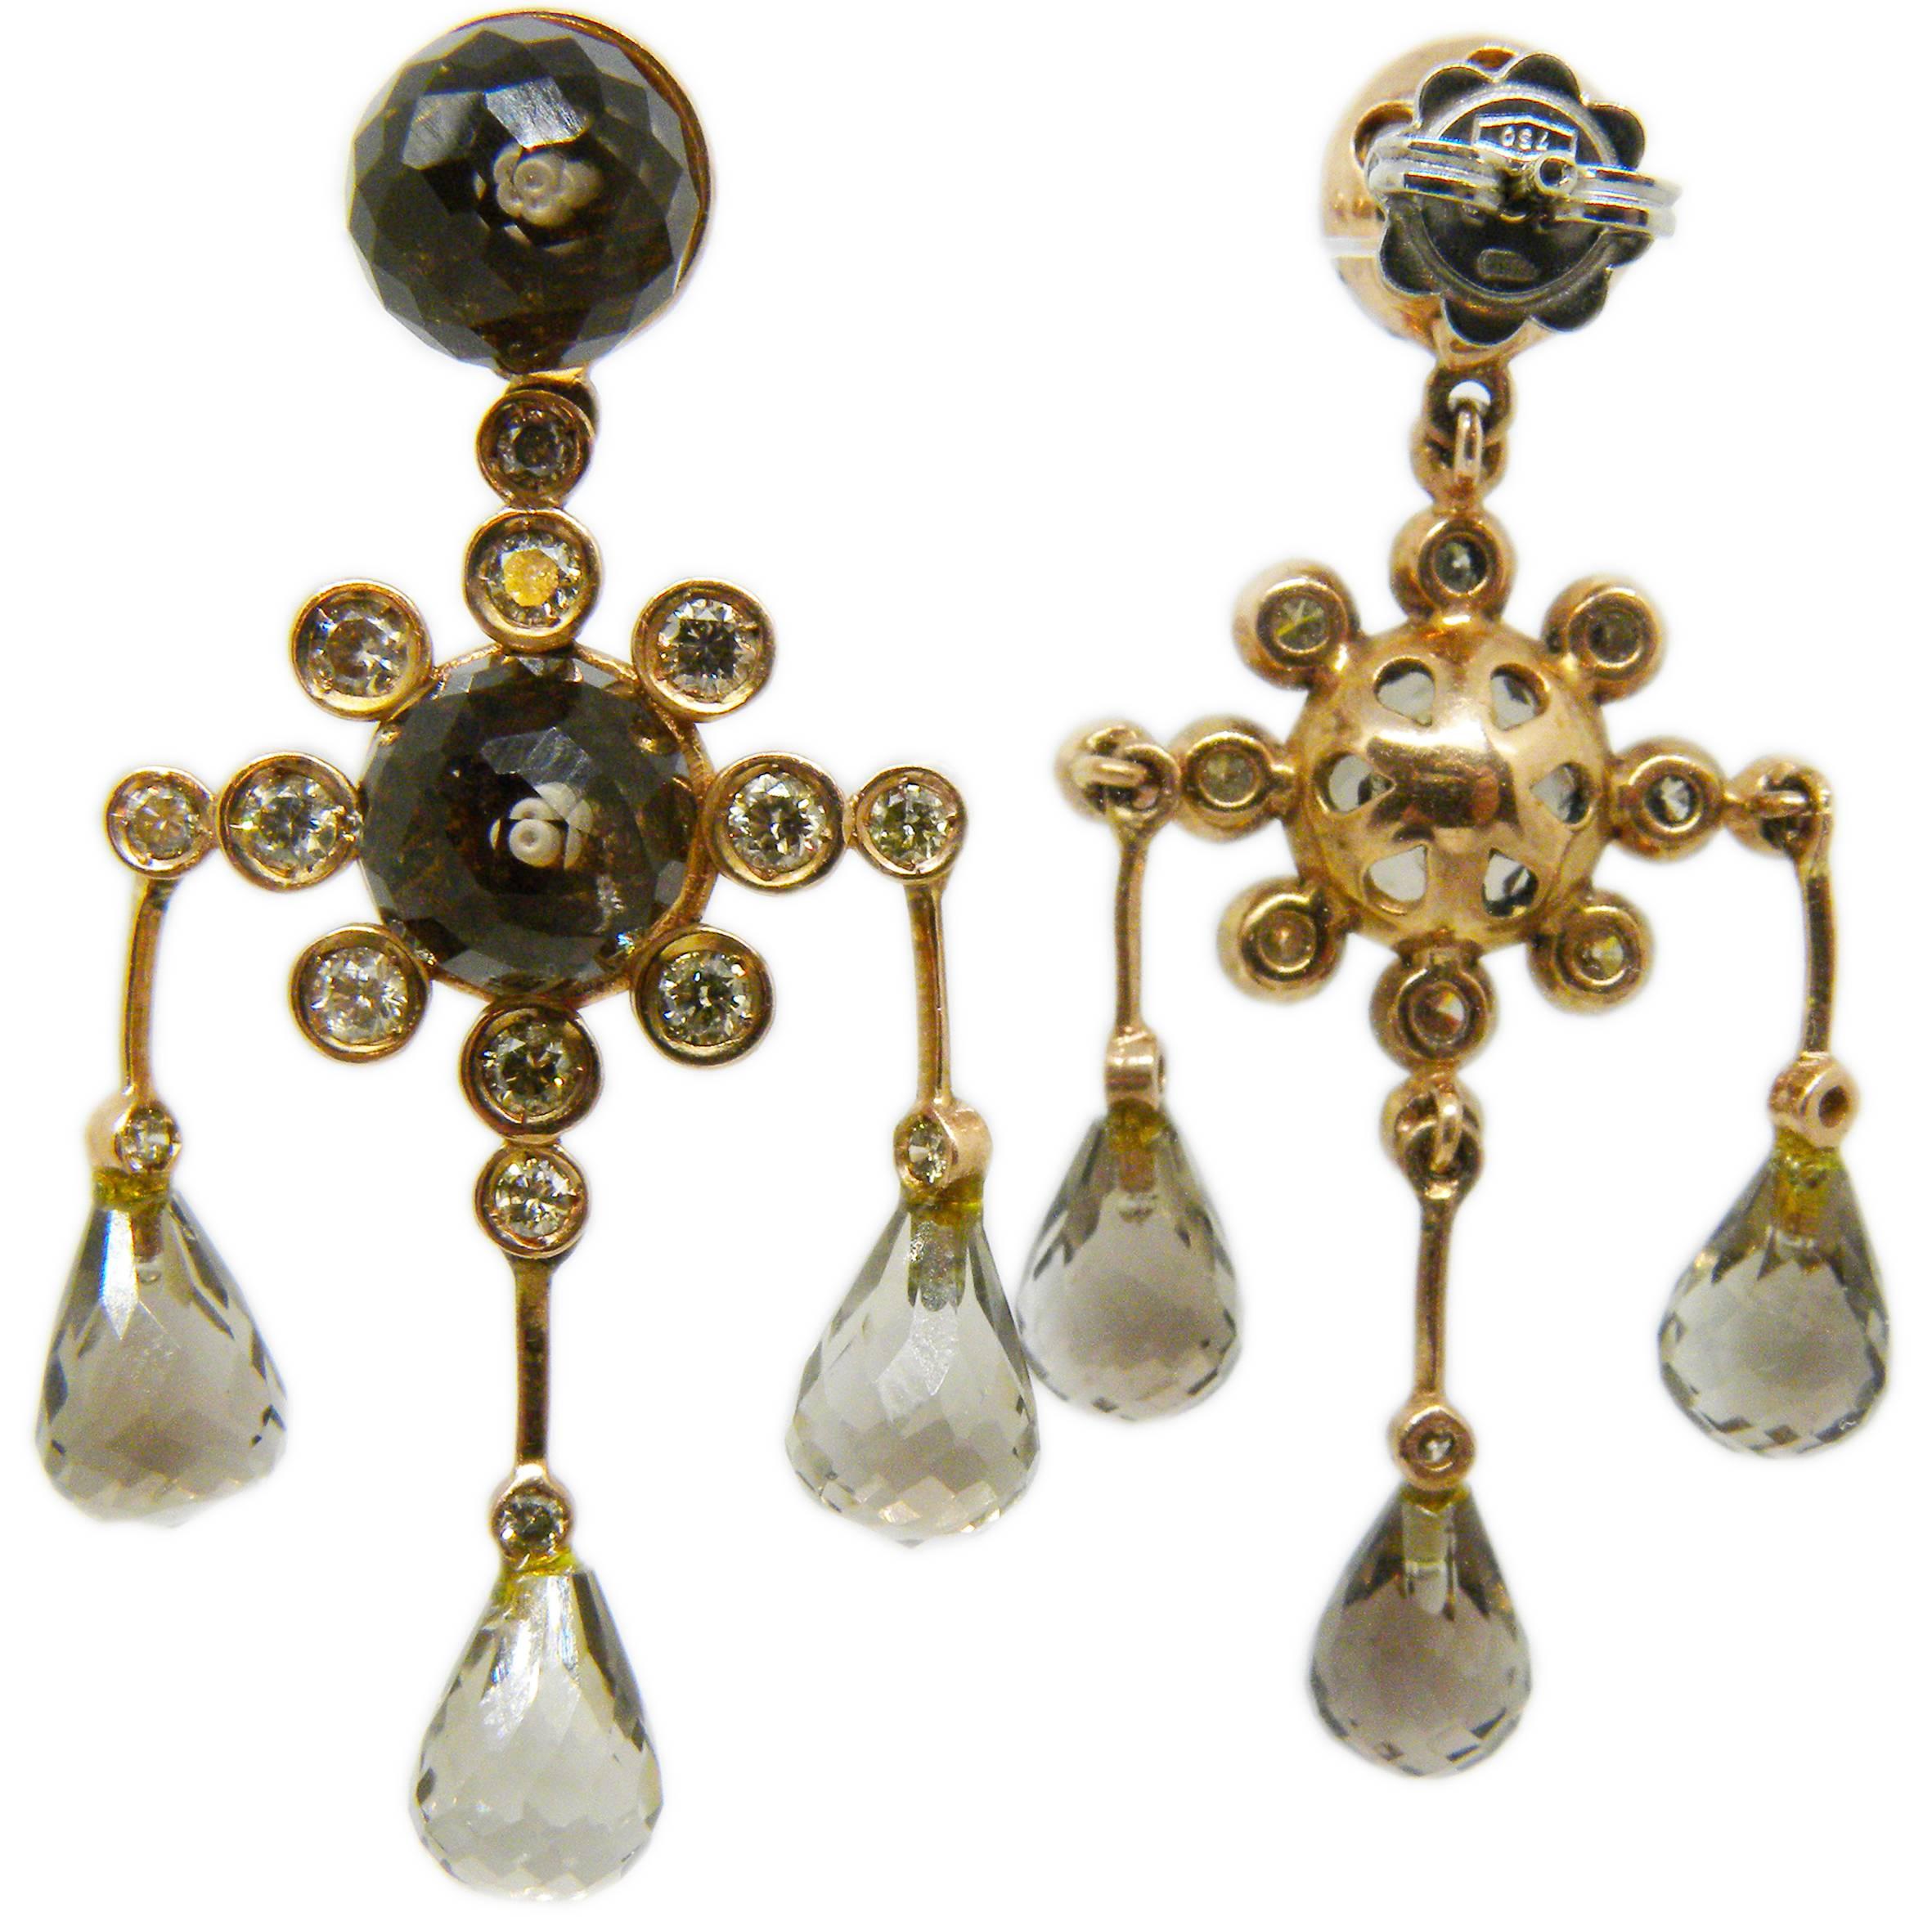 Chic Chandelier Earrings featuring 1 Carat Champagne Diamond Smoky Quartz Drop and Cabochon, Rose Gold Setting 